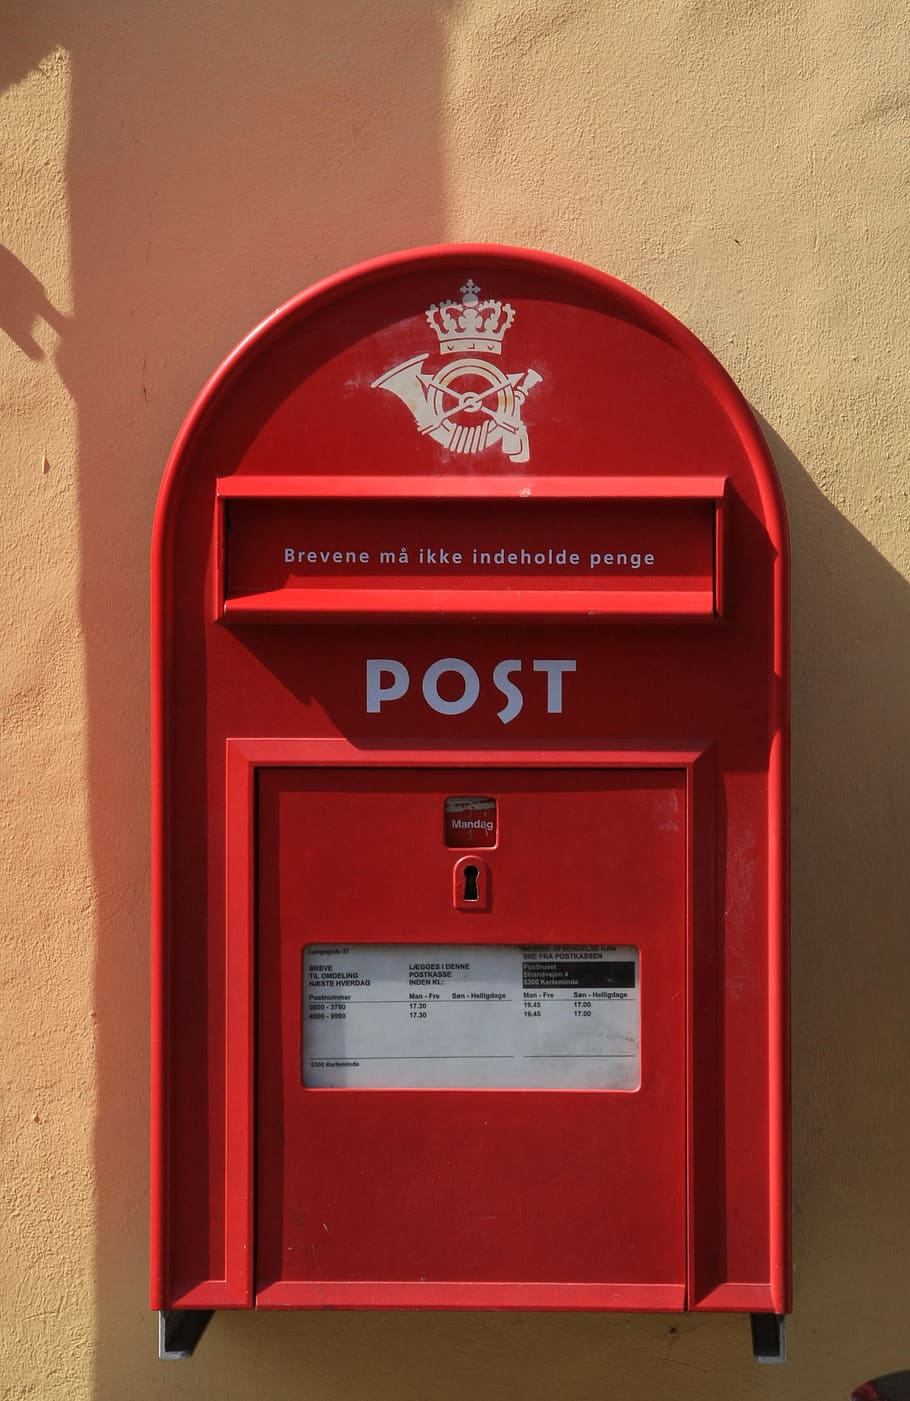 Postbox, Mail, Mailbox, Post, Box, red, letter, letterbox, postal, HD wallpaper